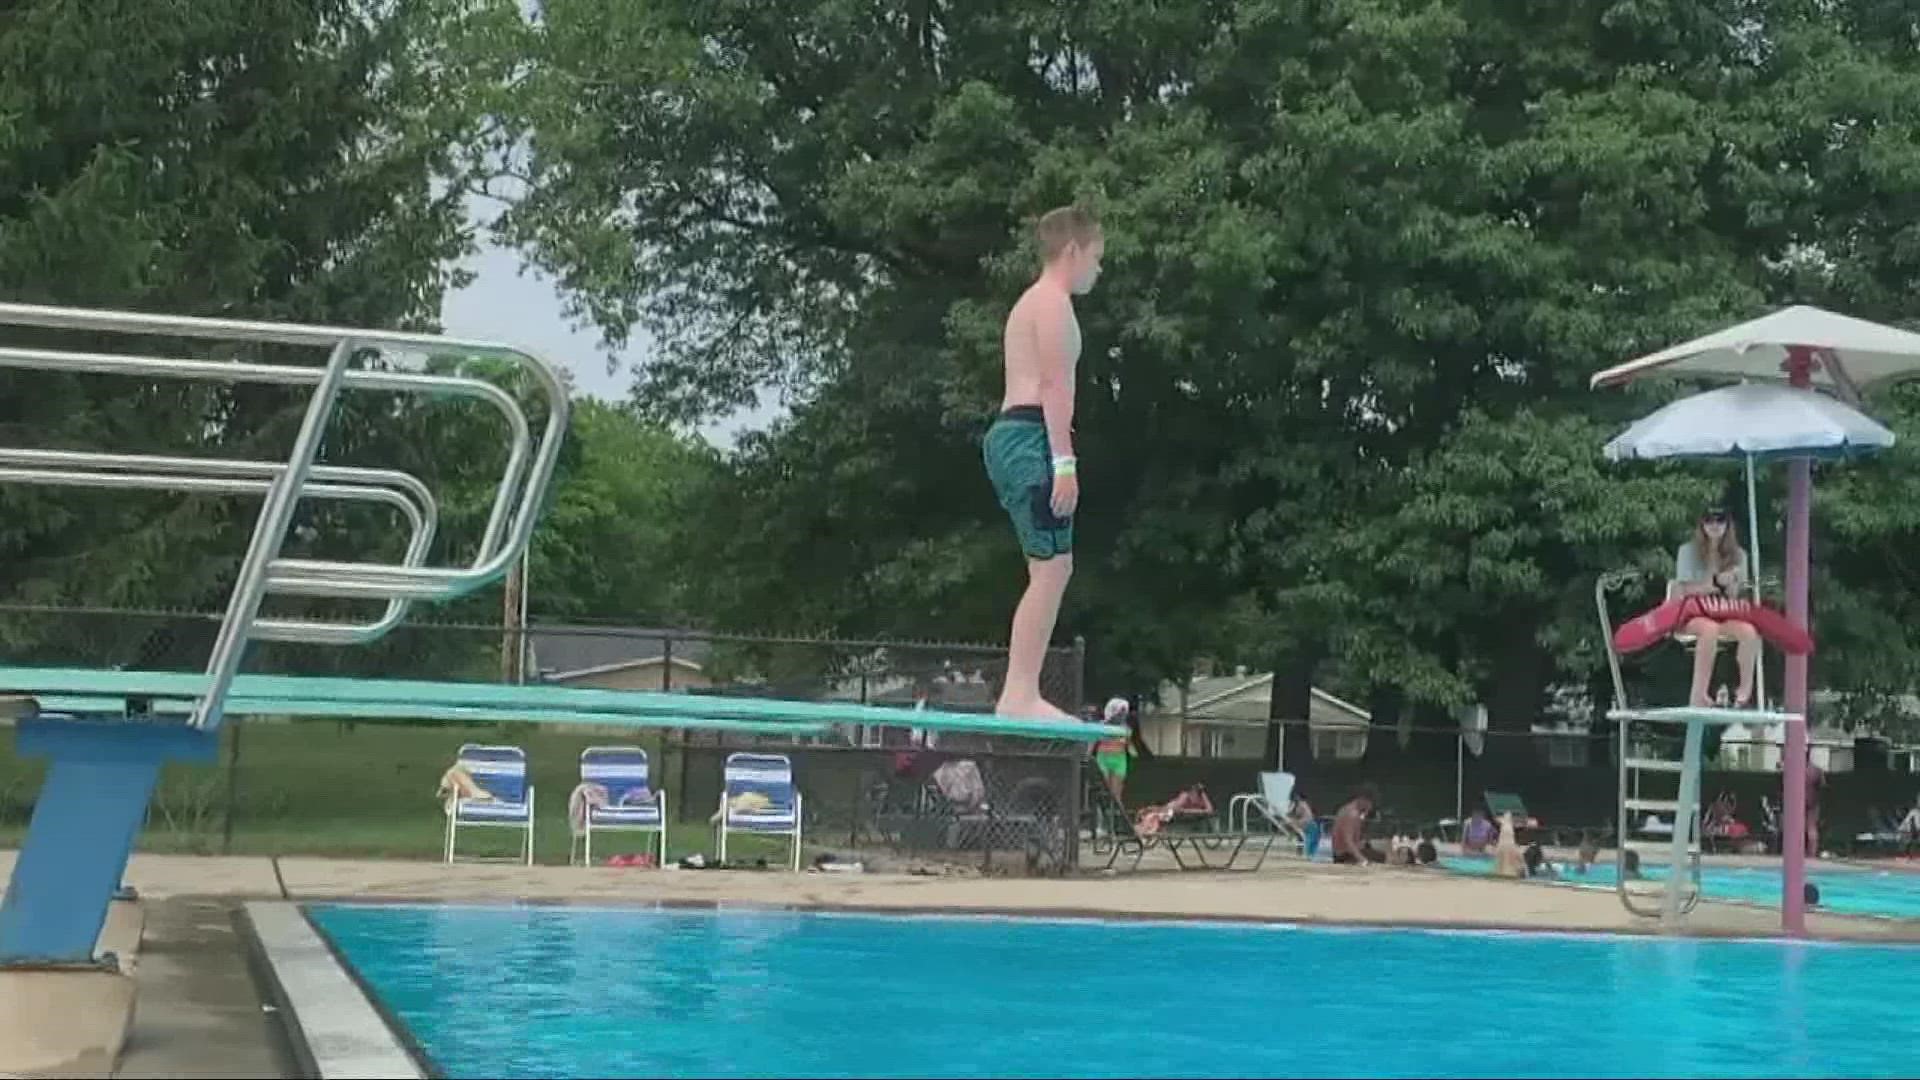 Water safety experts say your first instinct may be to jump in and save the person drowning, but that is actually not what you should do.